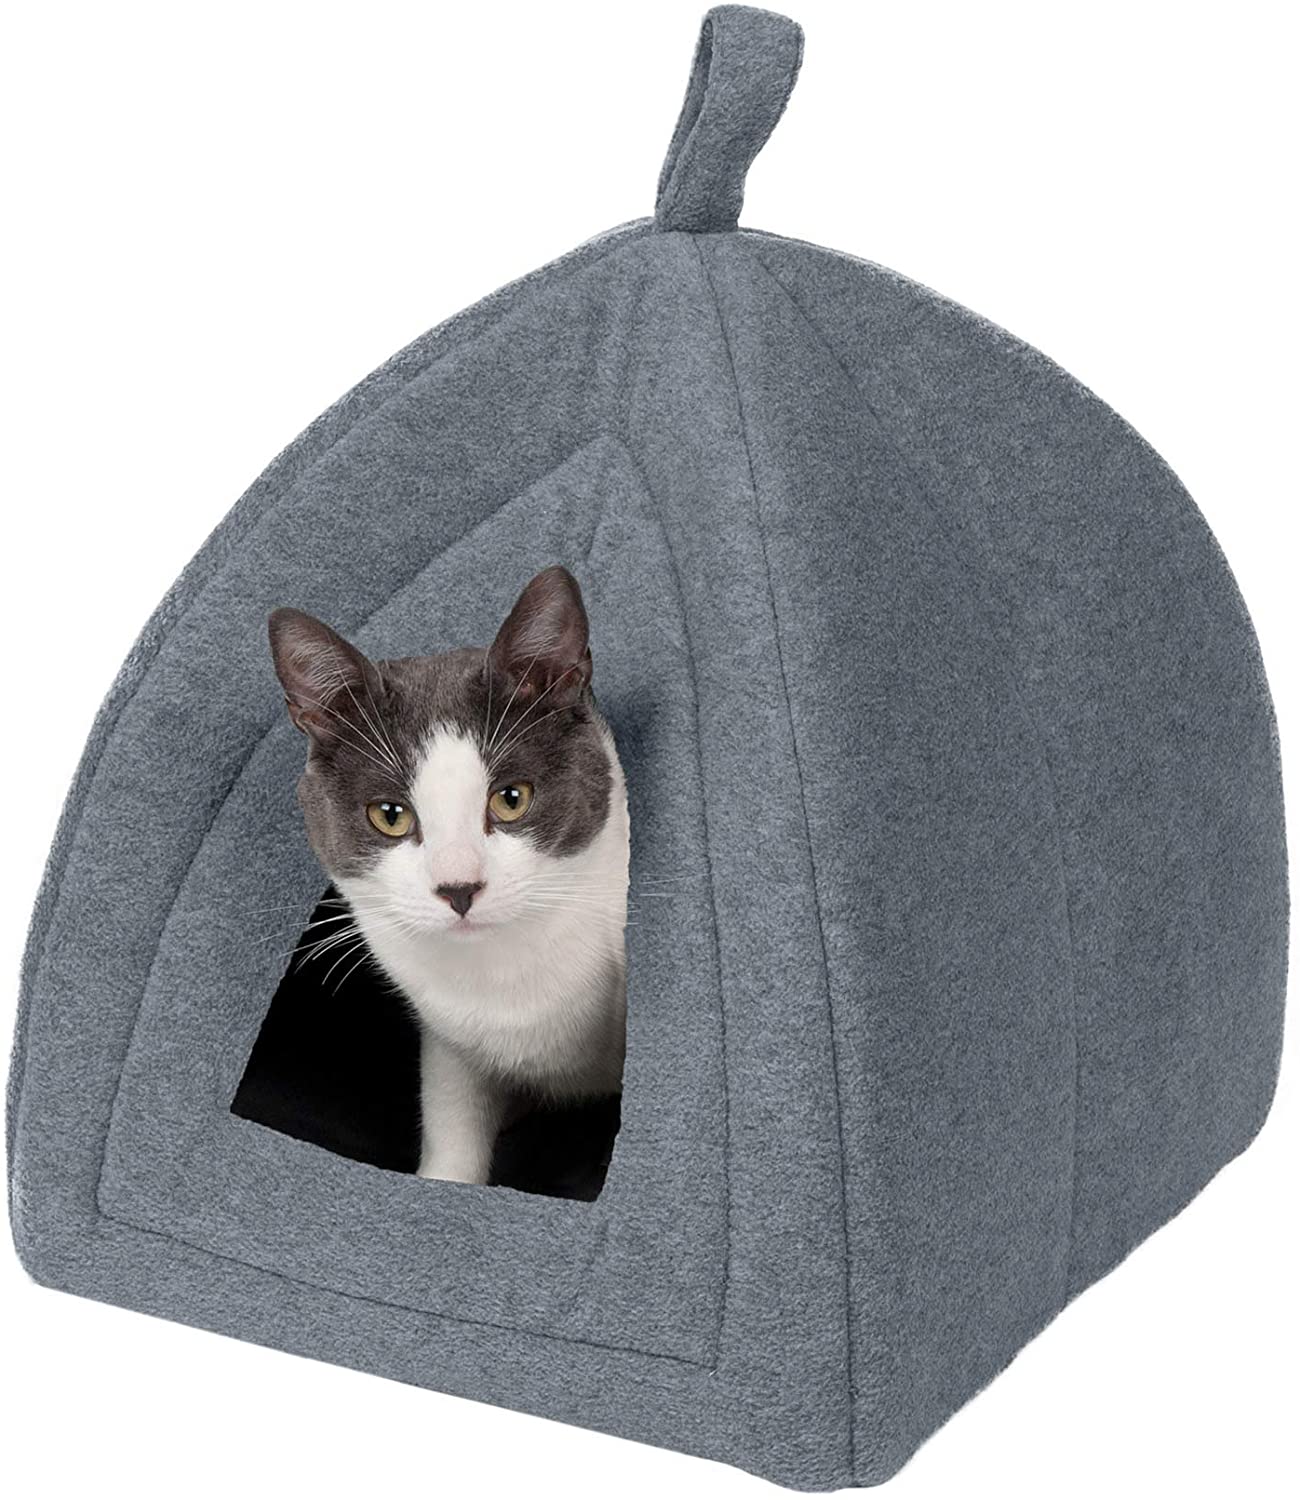 Furhaven Pet Beds Foldable Tent for Cats